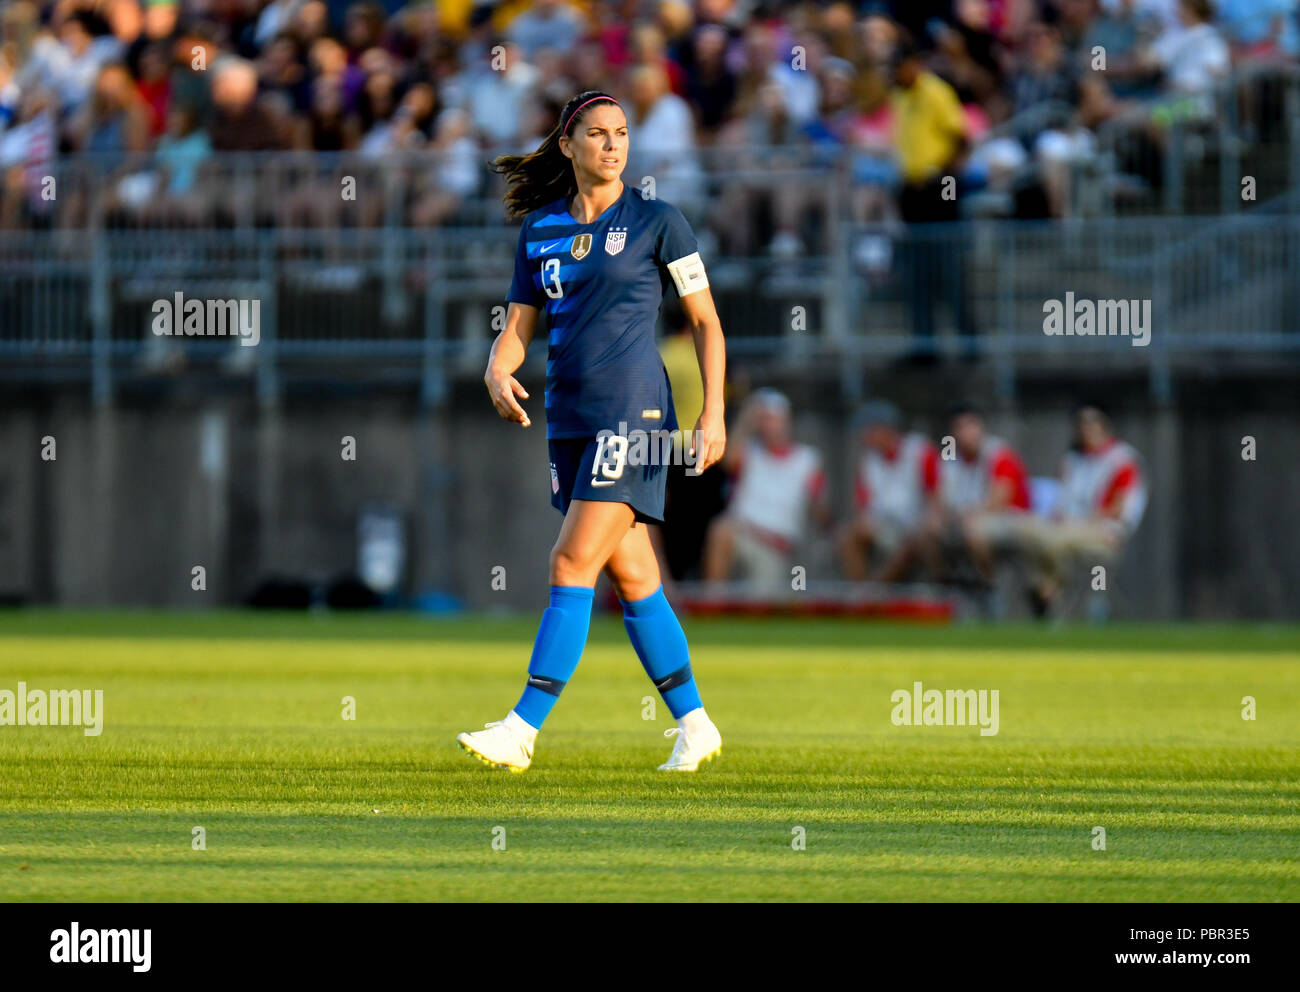 Sunday Aug 29, 2018: Alex Morgan (13) of the USWNT watches the action during a Tournament of Nations game against Australia at Pratt & Whitney Stadium in East Hartford, Connecticut. Gregory Vasil/CSM Stock Photo